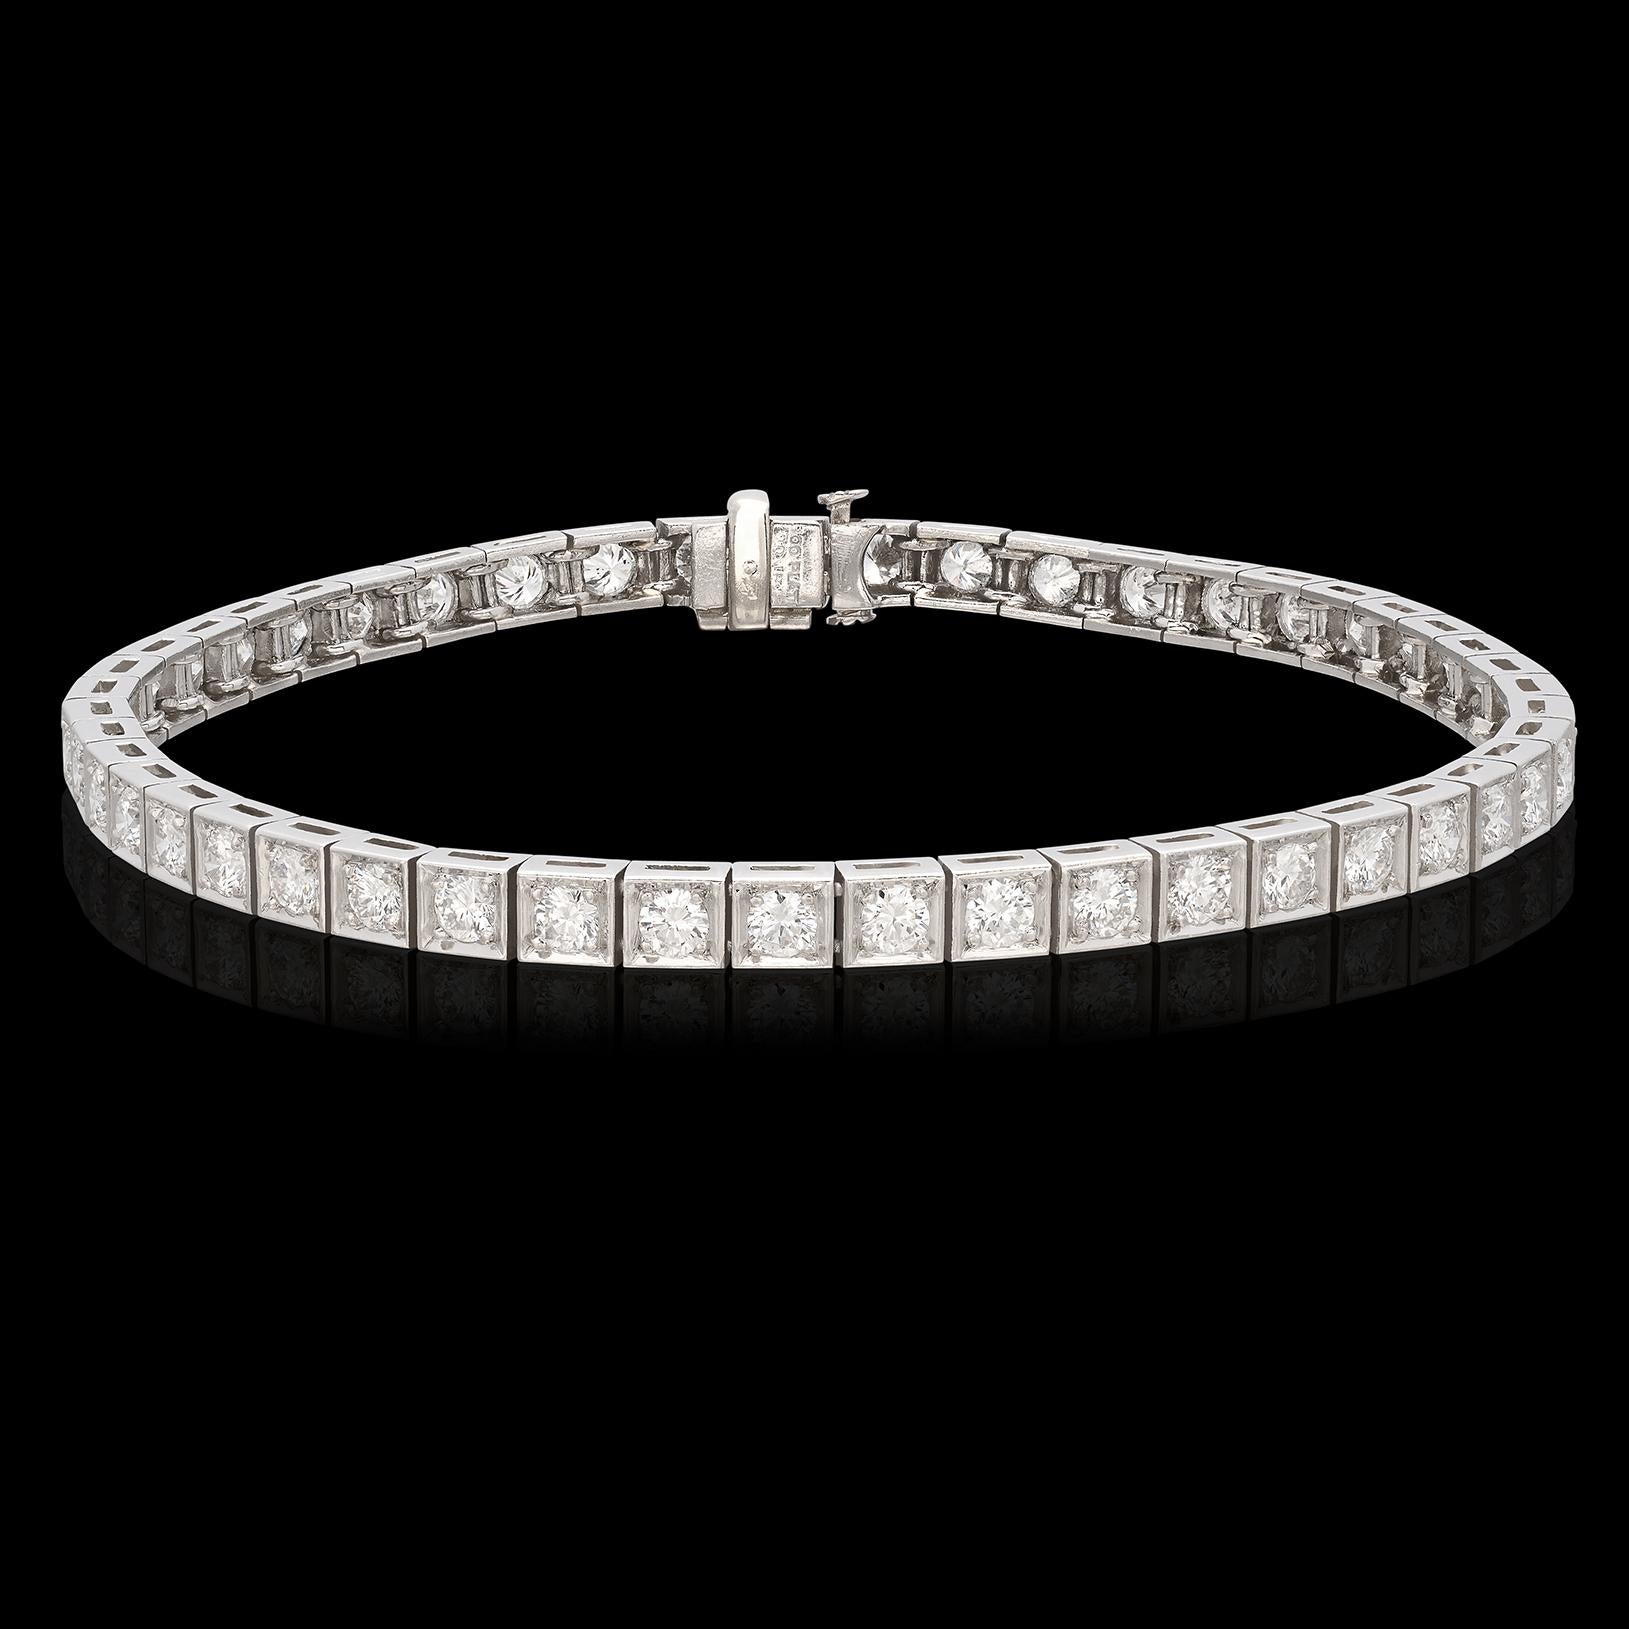 Some things really do get better with age. This stunning diamond line bracelet features 47 round cut diamonds set in individual square platinum settings for a total carat weight of 3.76 carats, giving this piece a classic geometric look reminiscent